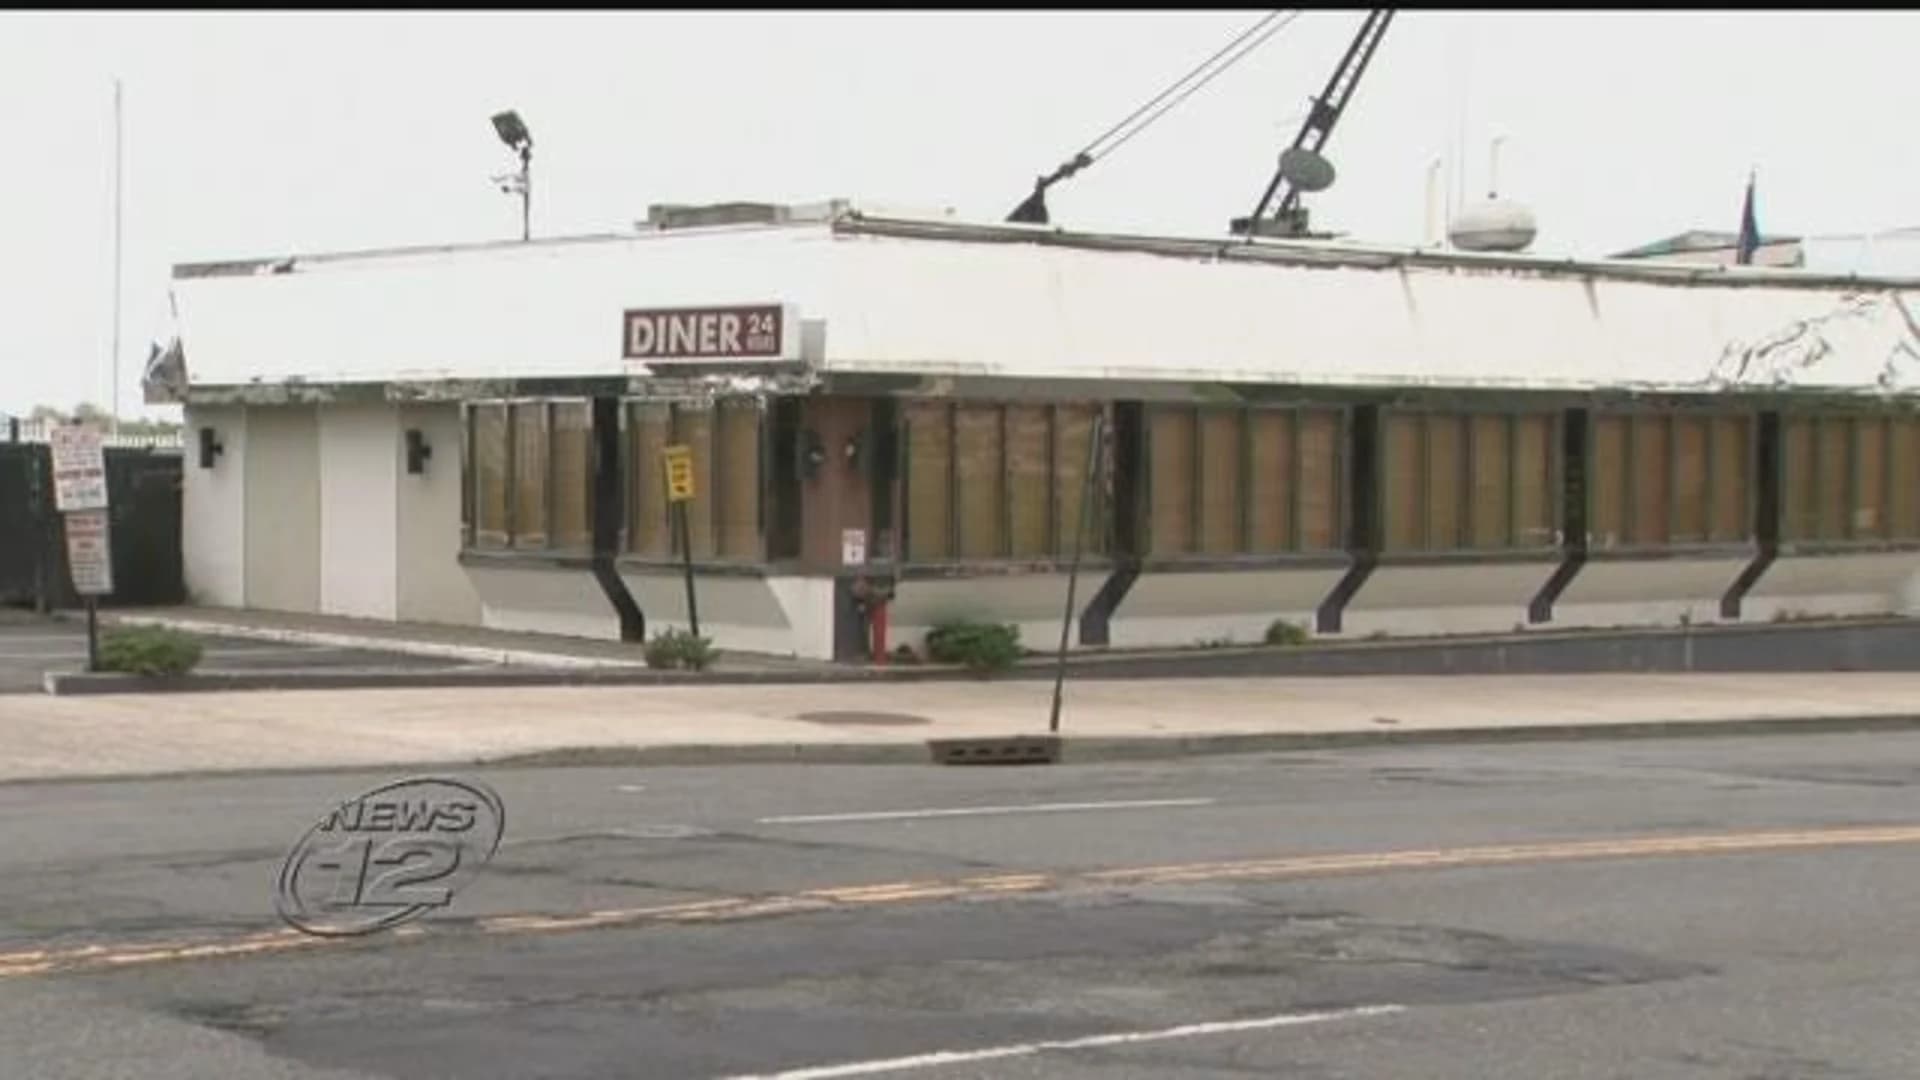 Diner remains closed after reported illness